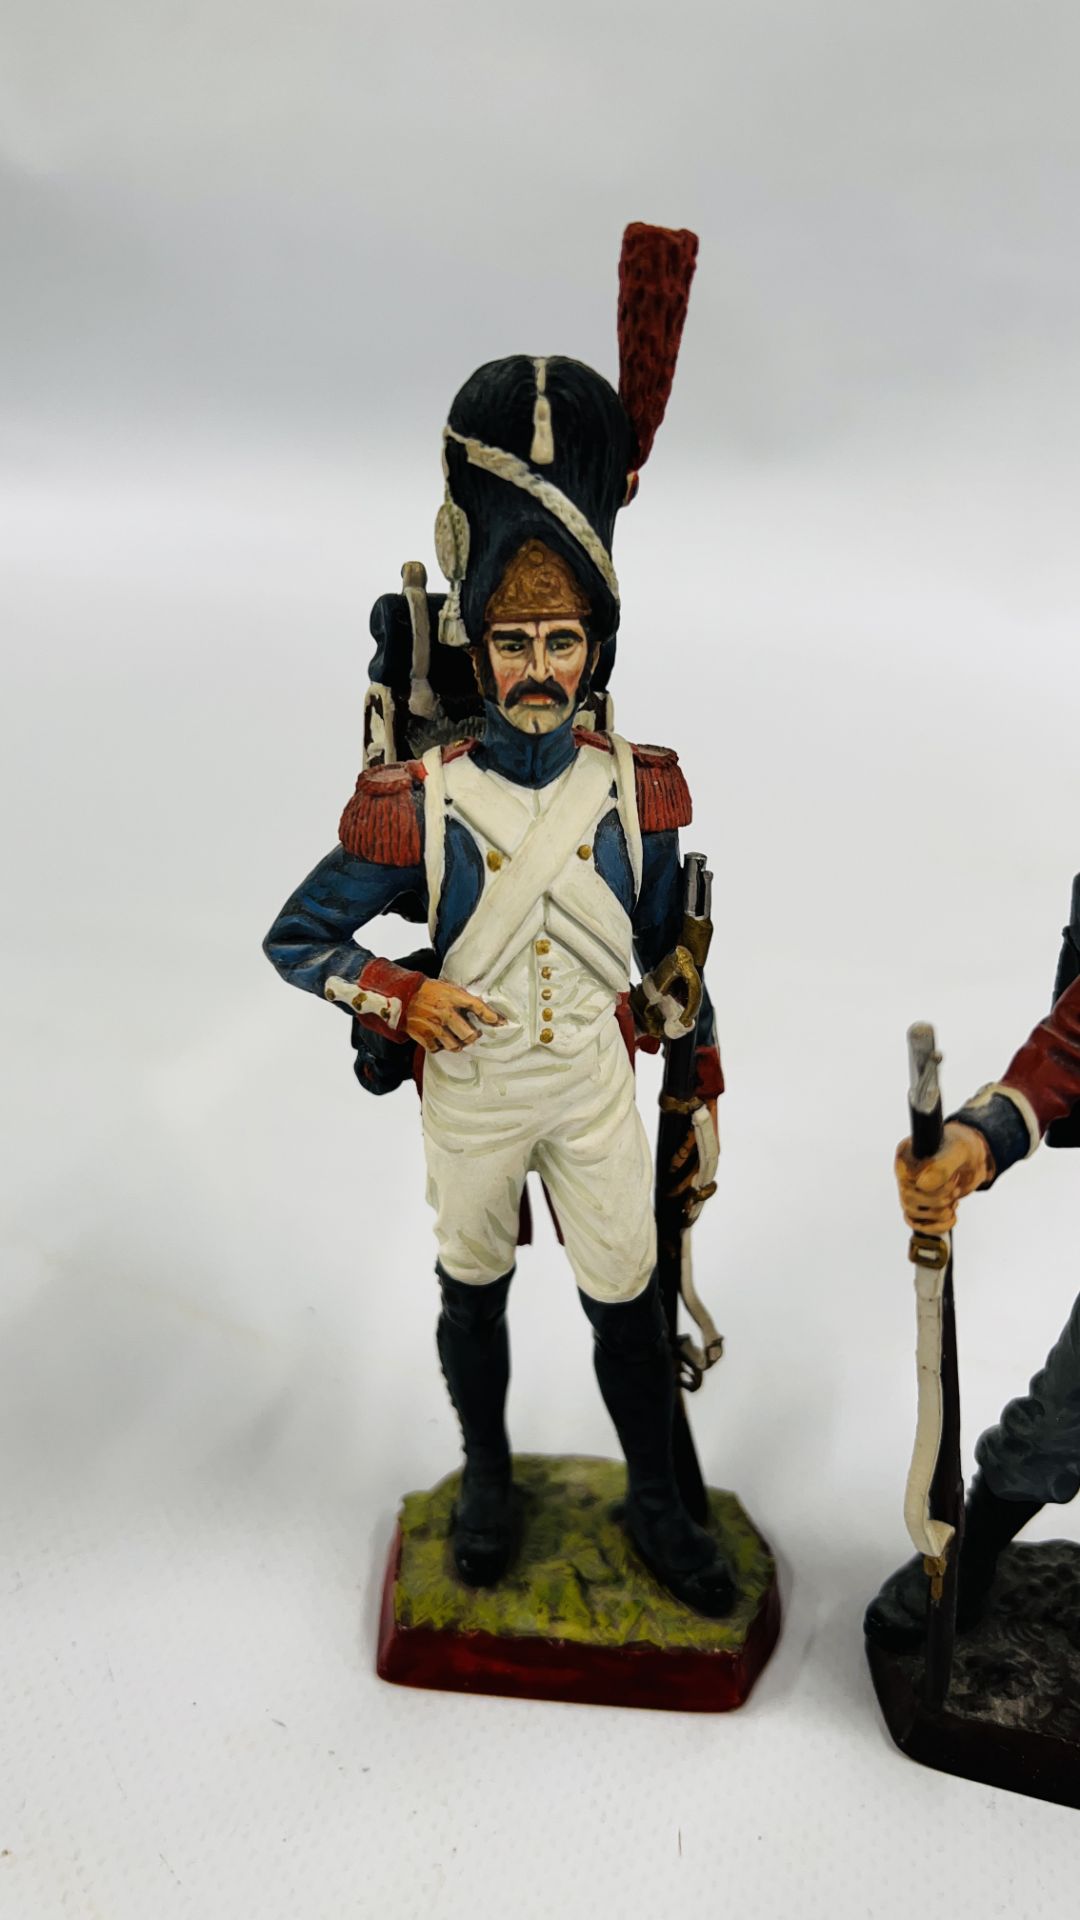 2 FRENCH LEAD SOLDIER FIGURES - H 15CM. - Image 3 of 6